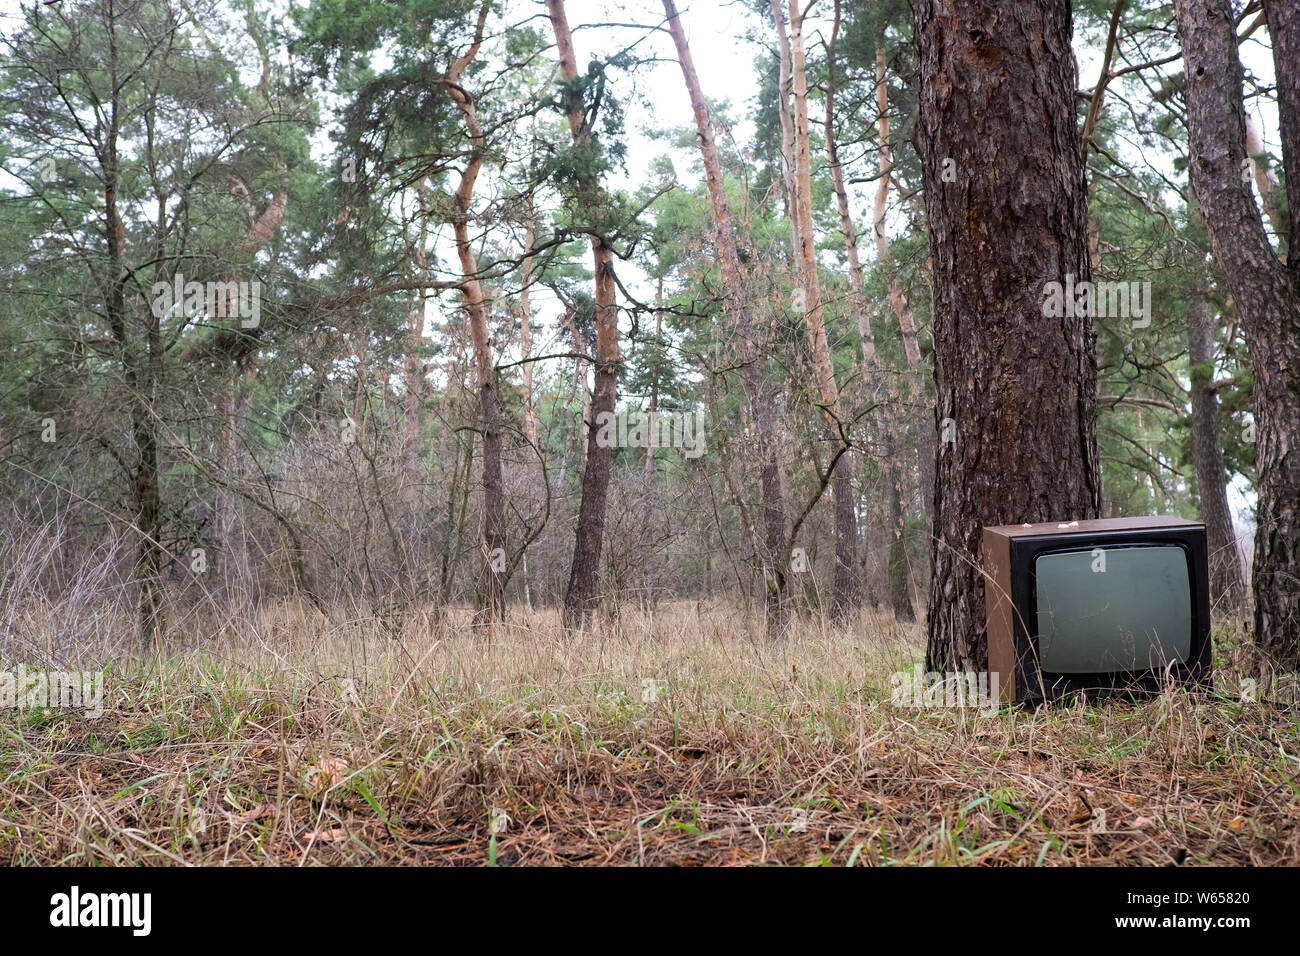 Discarded television set in the pin forest Stock Photo